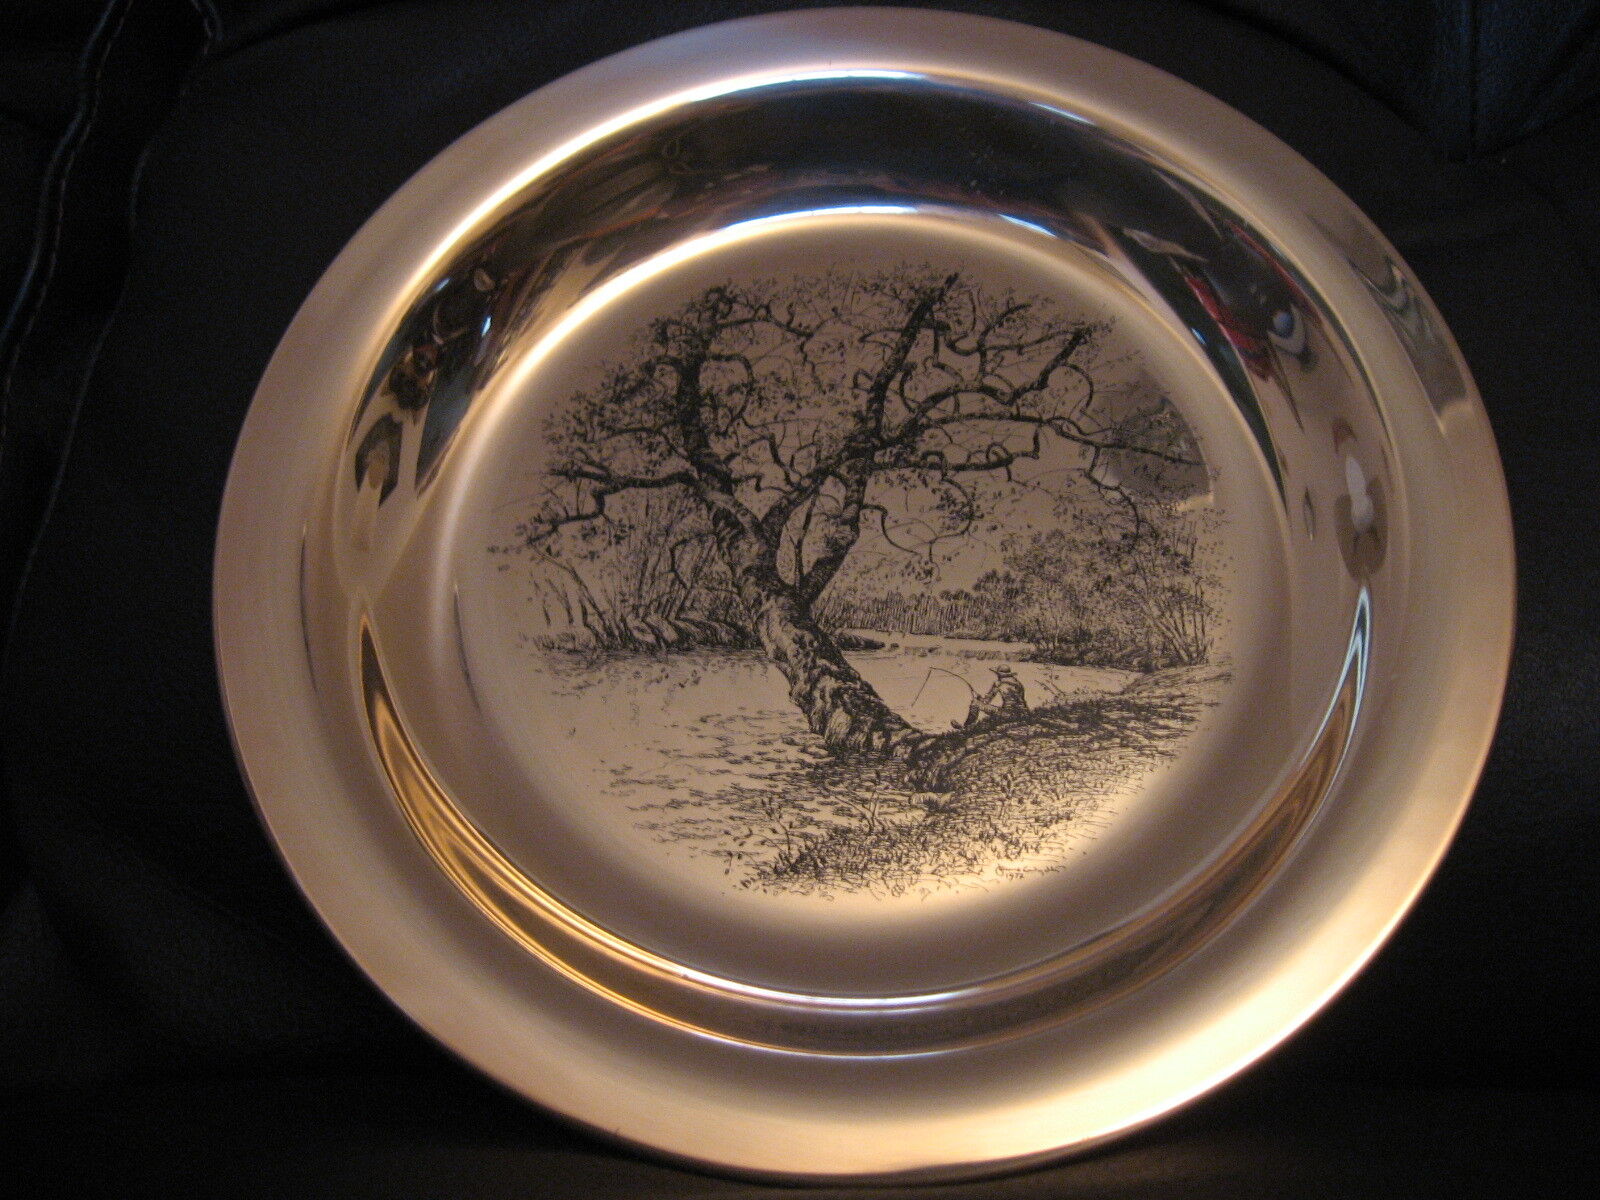 1972 FRANKLIN MINT *STERLING SILVER DISH PLATE* JAMES WYETH Along the Brandywine